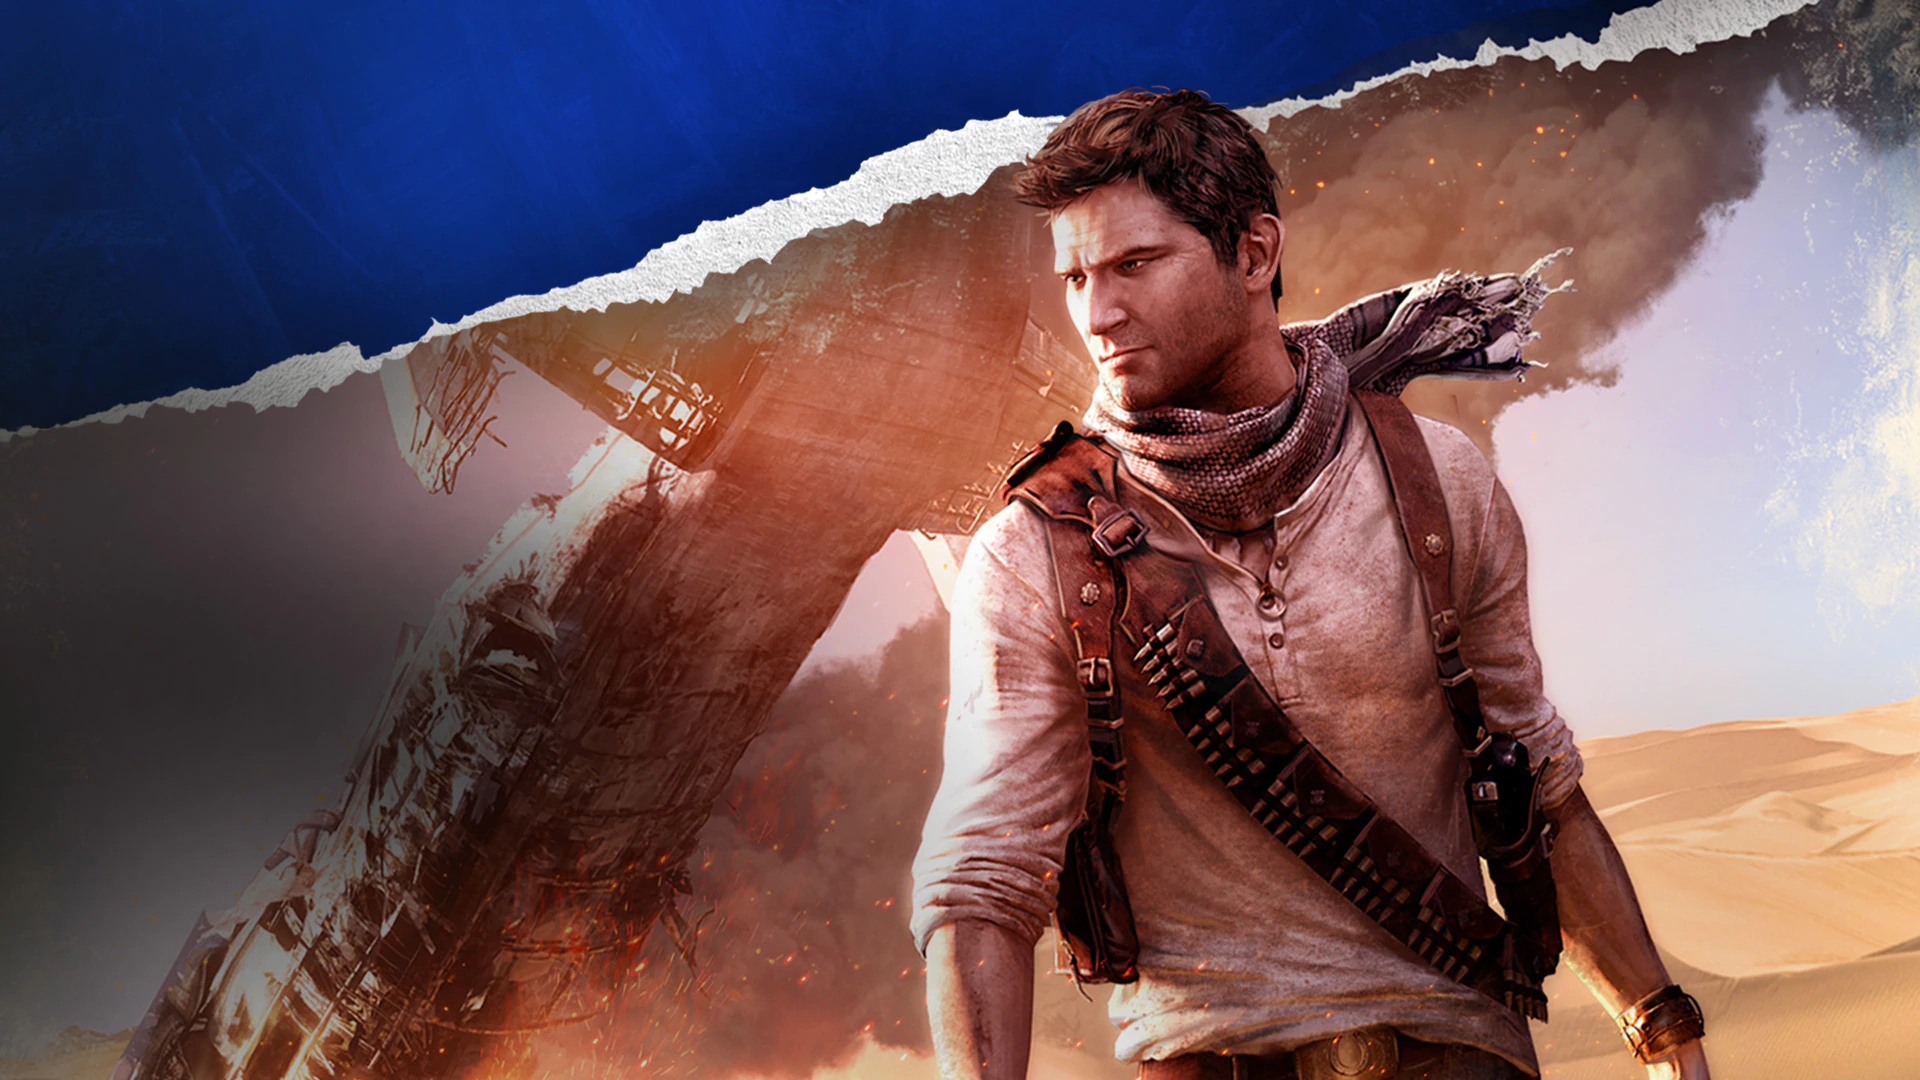 Uncharted 3 Cover